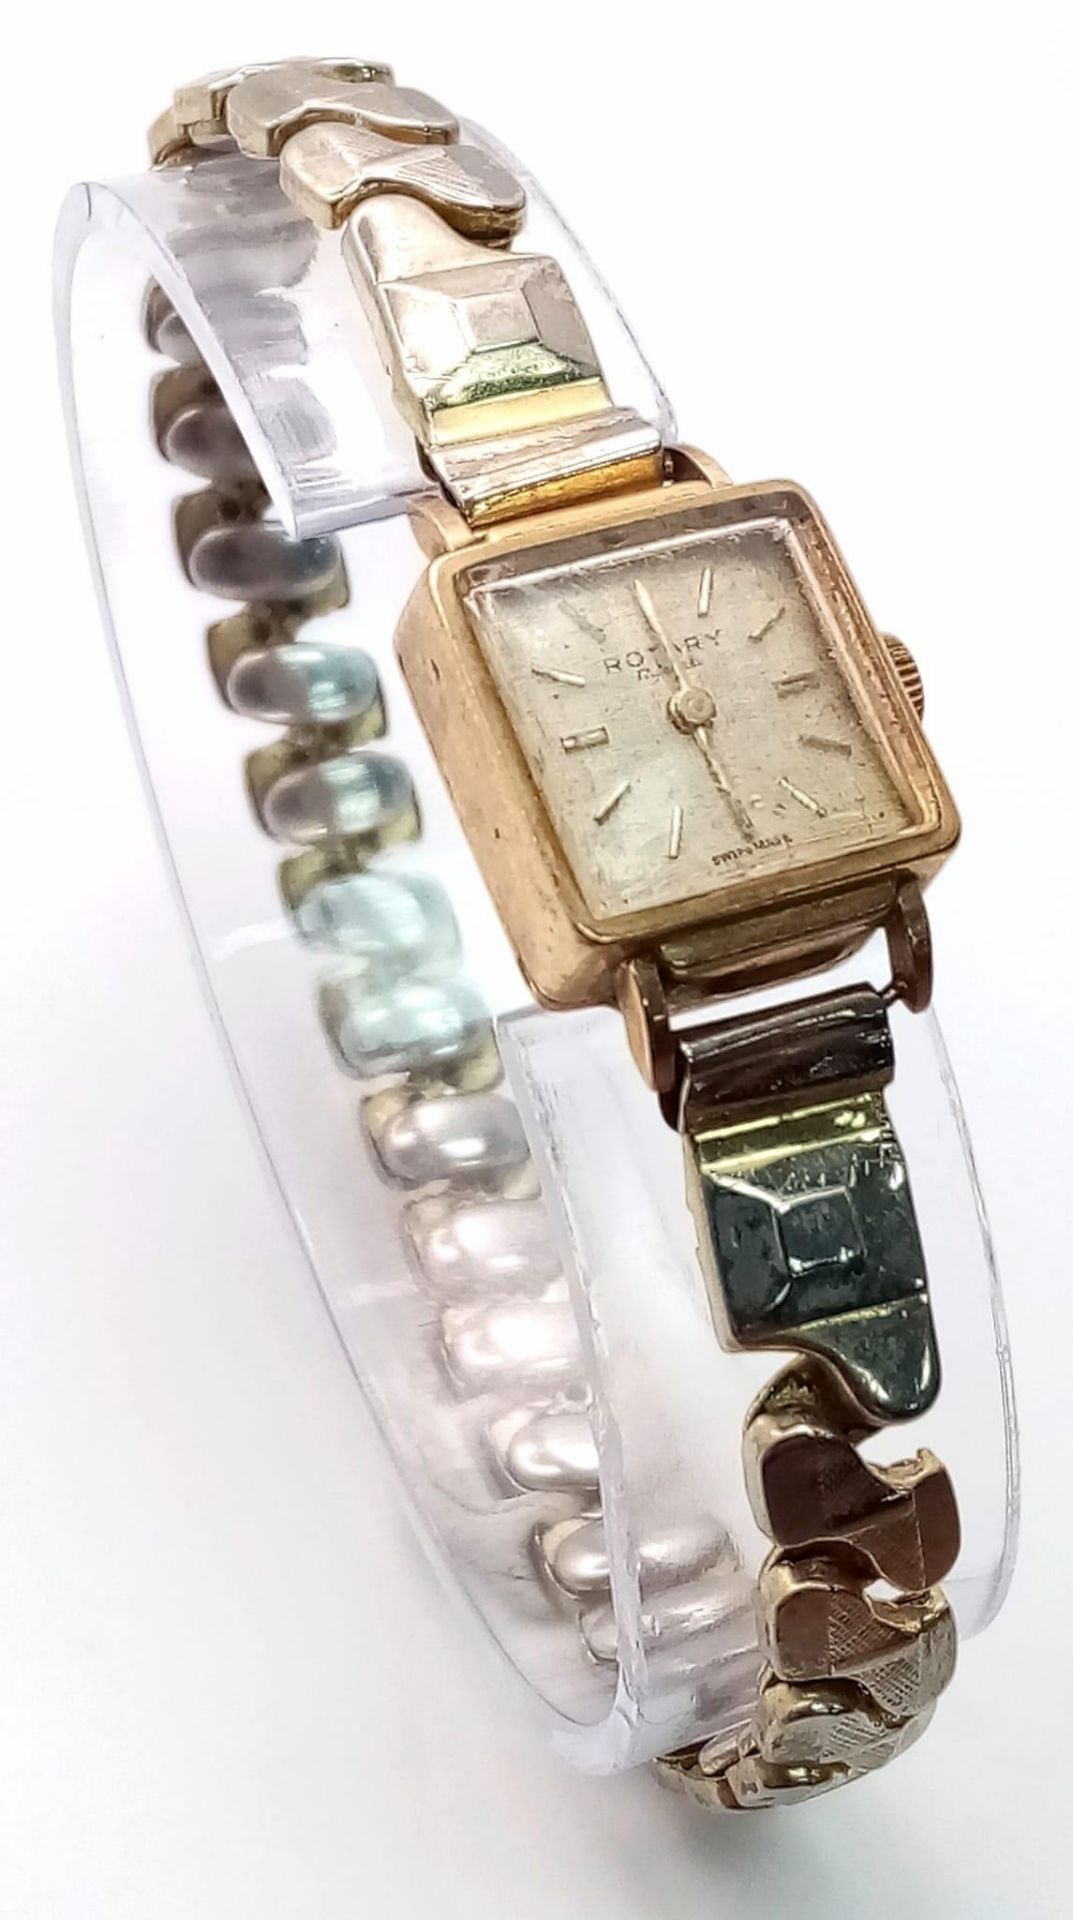 A Vintage 9K Yellow Gold Cased Rotary Ladies Watch. Not currently working so a/f. 14.5g total